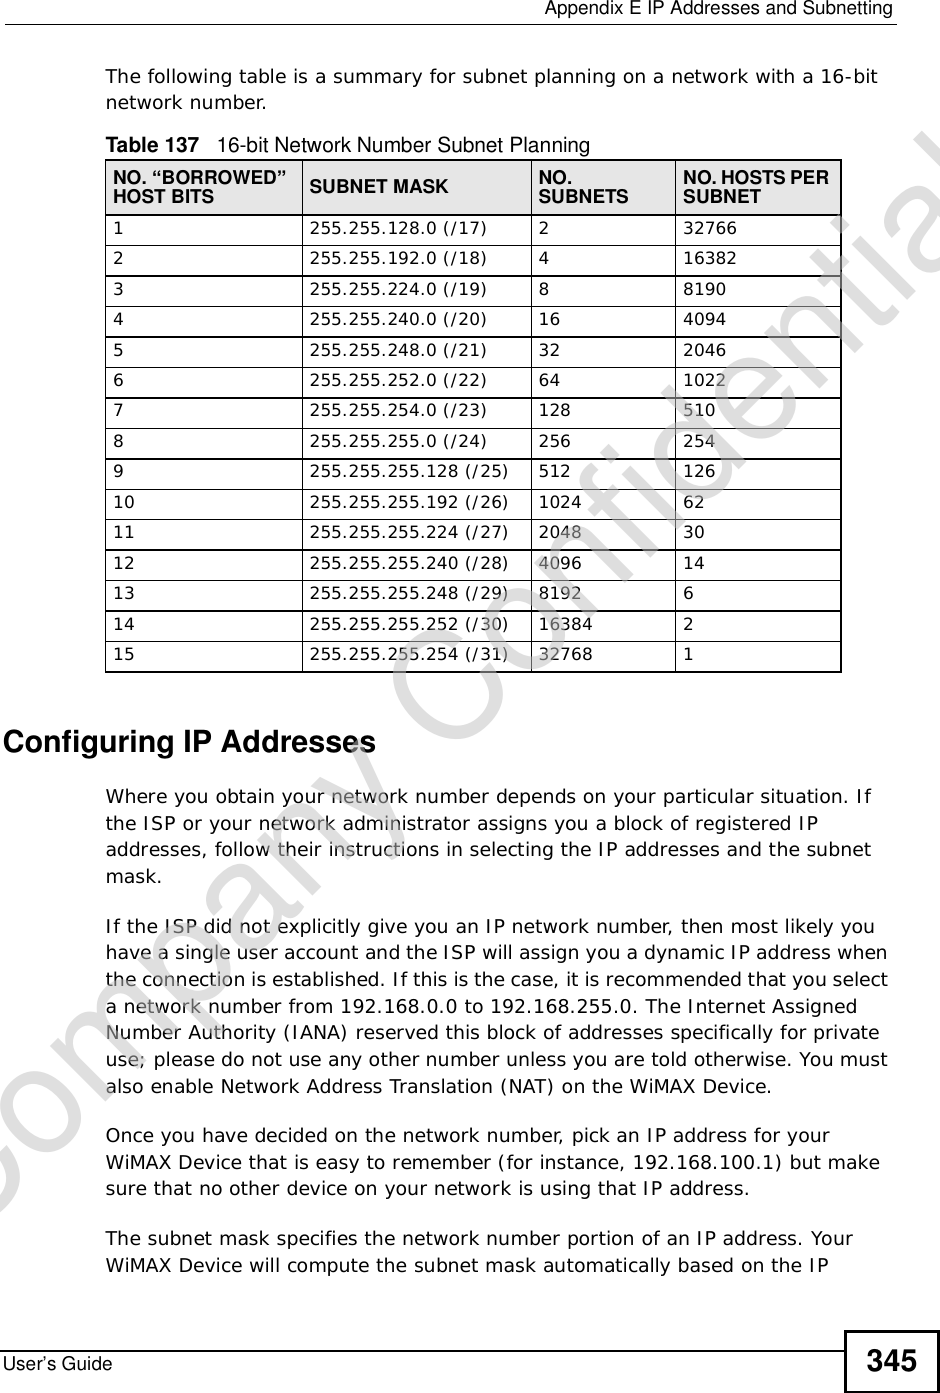  Appendix EIP Addresses and SubnettingUser’s Guide 345The following table is a summary for subnet planning on a network with a 16-bit network number. Configuring IP AddressesWhere you obtain your network number depends on your particular situation. If the ISP or your network administrator assigns you a block of registered IP addresses, follow their instructions in selecting the IP addresses and the subnet mask.If the ISP did not explicitly give you an IP network number, then most likely you have a single user account and the ISP will assign you a dynamic IP address when the connection is established. If this is the case, it is recommended that you select a network number from 192.168.0.0 to 192.168.255.0. The Internet Assigned Number Authority (IANA) reserved this block of addresses specifically for private use; please do not use any other number unless you are told otherwise. You must also enable Network Address Translation (NAT) on the WiMAX Device. Once you have decided on the network number, pick an IP address for your WiMAX Device that is easy to remember (for instance, 192.168.100.1) but make sure that no other device on your network is using that IP address.The subnet mask specifies the network number portion of an IP address. Your WiMAX Device will compute the subnet mask automatically based on the IP Table 137   16-bit Network Number Subnet PlanningNO. “BORROWED” HOST BITS SUBNET MASK NO.SUBNETS NO. HOSTS PER SUBNET1255.255.128.0 (/17) 2 327662 255.255.192.0 (/18) 4 163823 255.255.224.0 (/19) 8 81904255.255.240.0 (/20) 16 40945255.255.248.0 (/21) 32 20466255.255.252.0 (/22) 64 10227255.255.254.0 (/23) 128 5108 255.255.255.0 (/24) 256 2549 255.255.255.128 (/25) 512 12610 255.255.255.192 (/26) 1024 6211 255.255.255.224 (/27) 2048 3012 255.255.255.240 (/28) 4096 1413 255.255.255.248 (/29) 8192 614 255.255.255.252 (/30) 16384 215 255.255.255.254 (/31) 32768 1Company Confidential